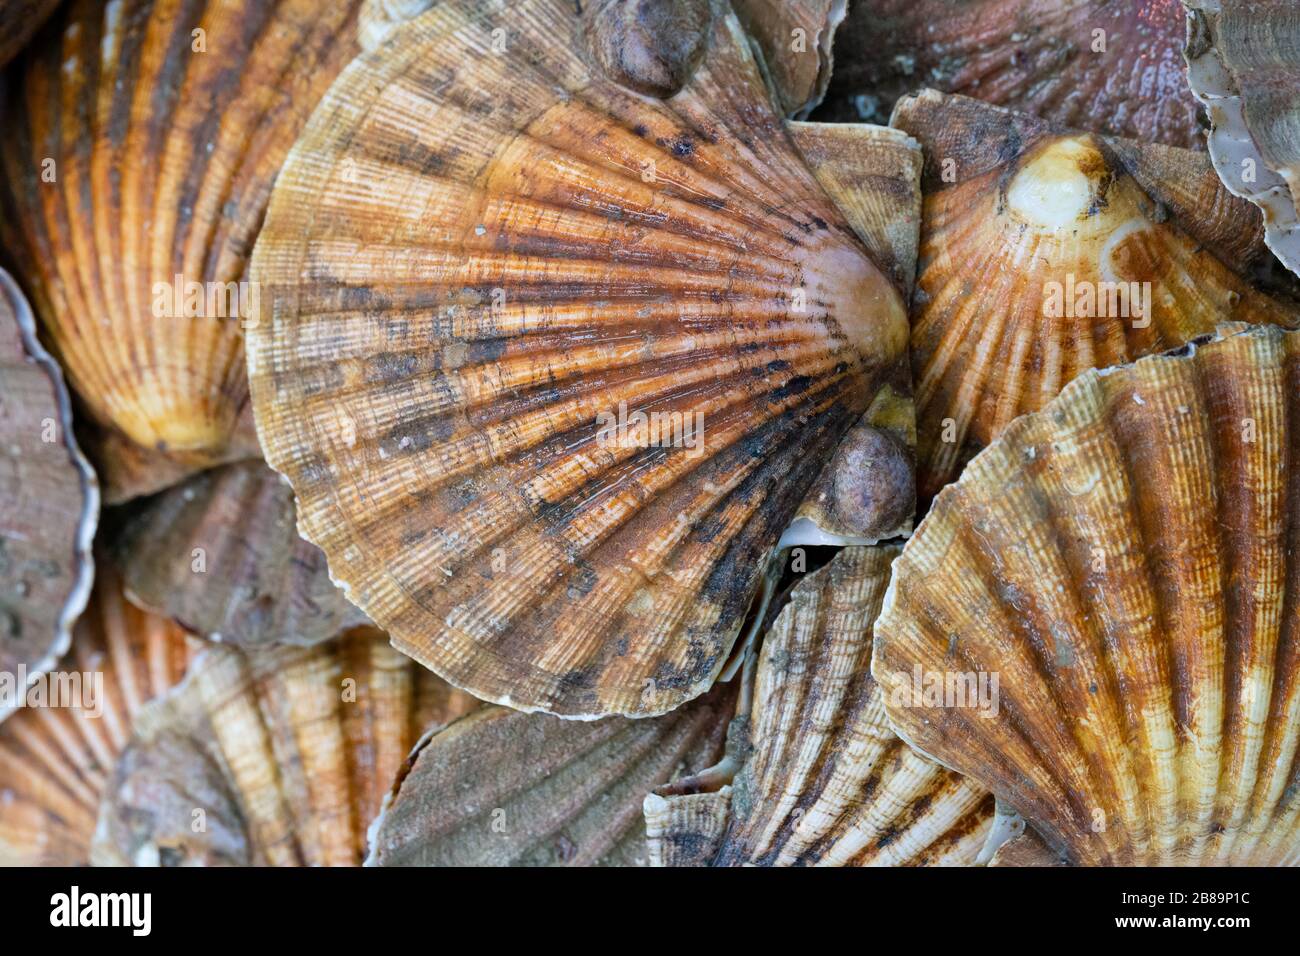 Pile of fresh scallops for sale at a London fishmongers Stock Photo